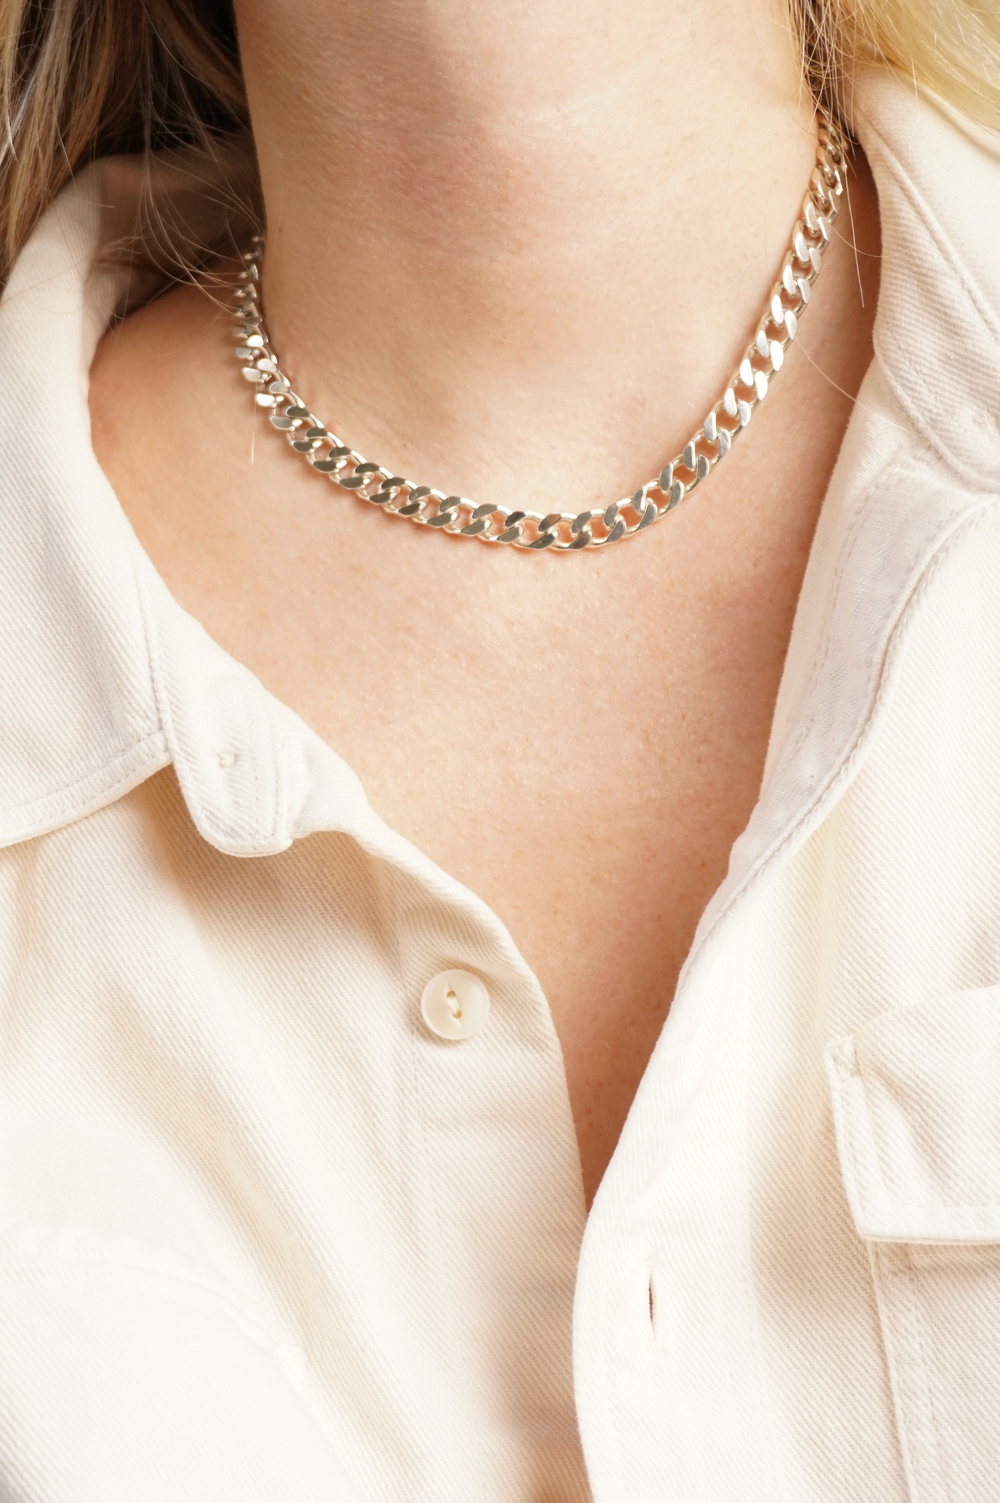 CURB CHAIN NECKLACE IN STERLING SILVER — CHARLOTTE CAUWE STUDIO